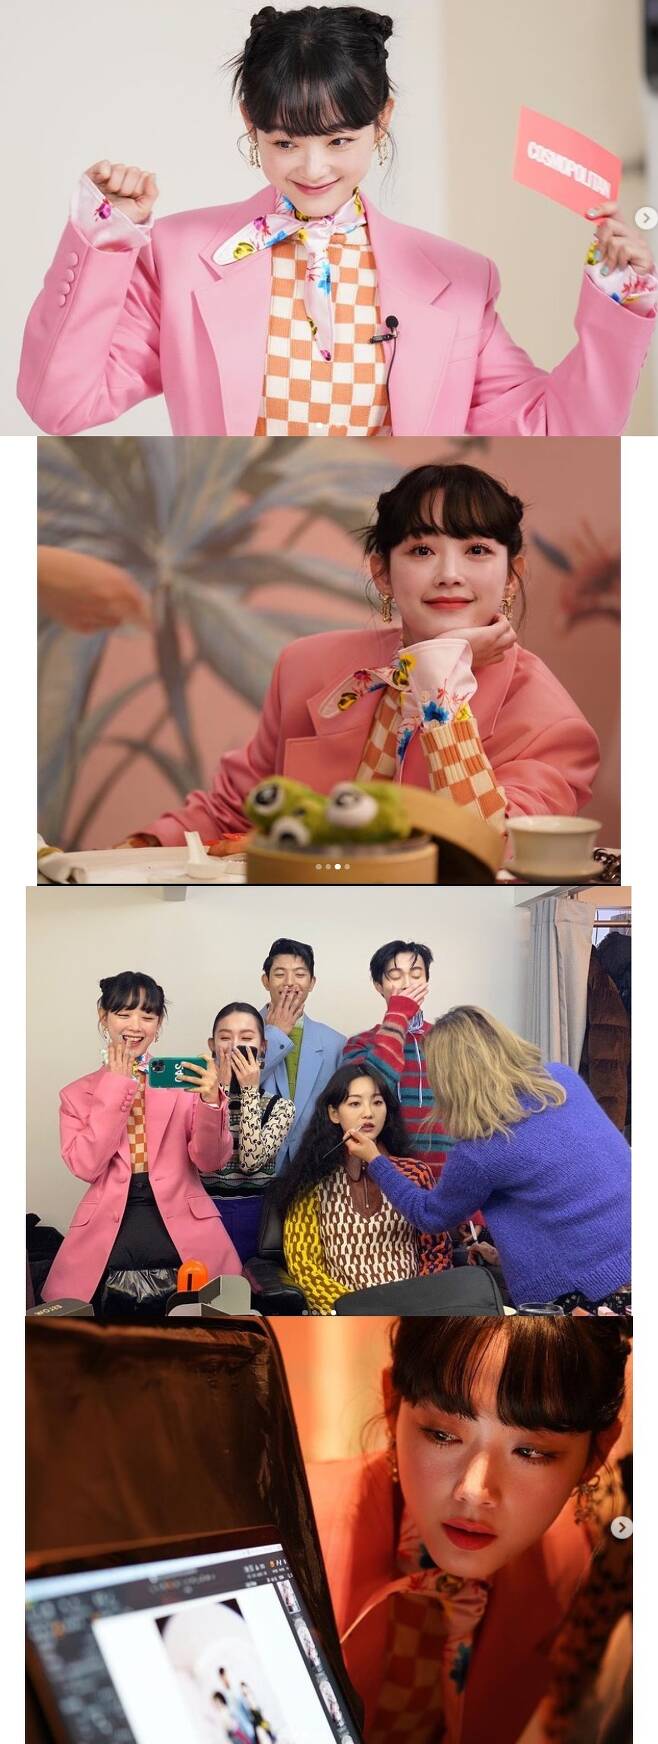 Seoul = = Actor Lee Yoo-Mi showed off her new charm.Lee Yoo-Mi posted photos taken at the photo shoot site on Instagram on the 2nd.Lee Yoo-Mi in the photo showed off her cute charm with pink suit and juicy makeup.In addition, My school now shooting the picture together with the actor Park Ji-hoo Joy Hyun Romon Yoon Chan-young took the same pose and conveyed the atmosphere of cheerfulness.Lee Yoo-Mi played the role of anger-inducing character in the Netflix drama My School Now released on January 28th.My school now is popular, including the top of the Netflix world chart in a day of release.